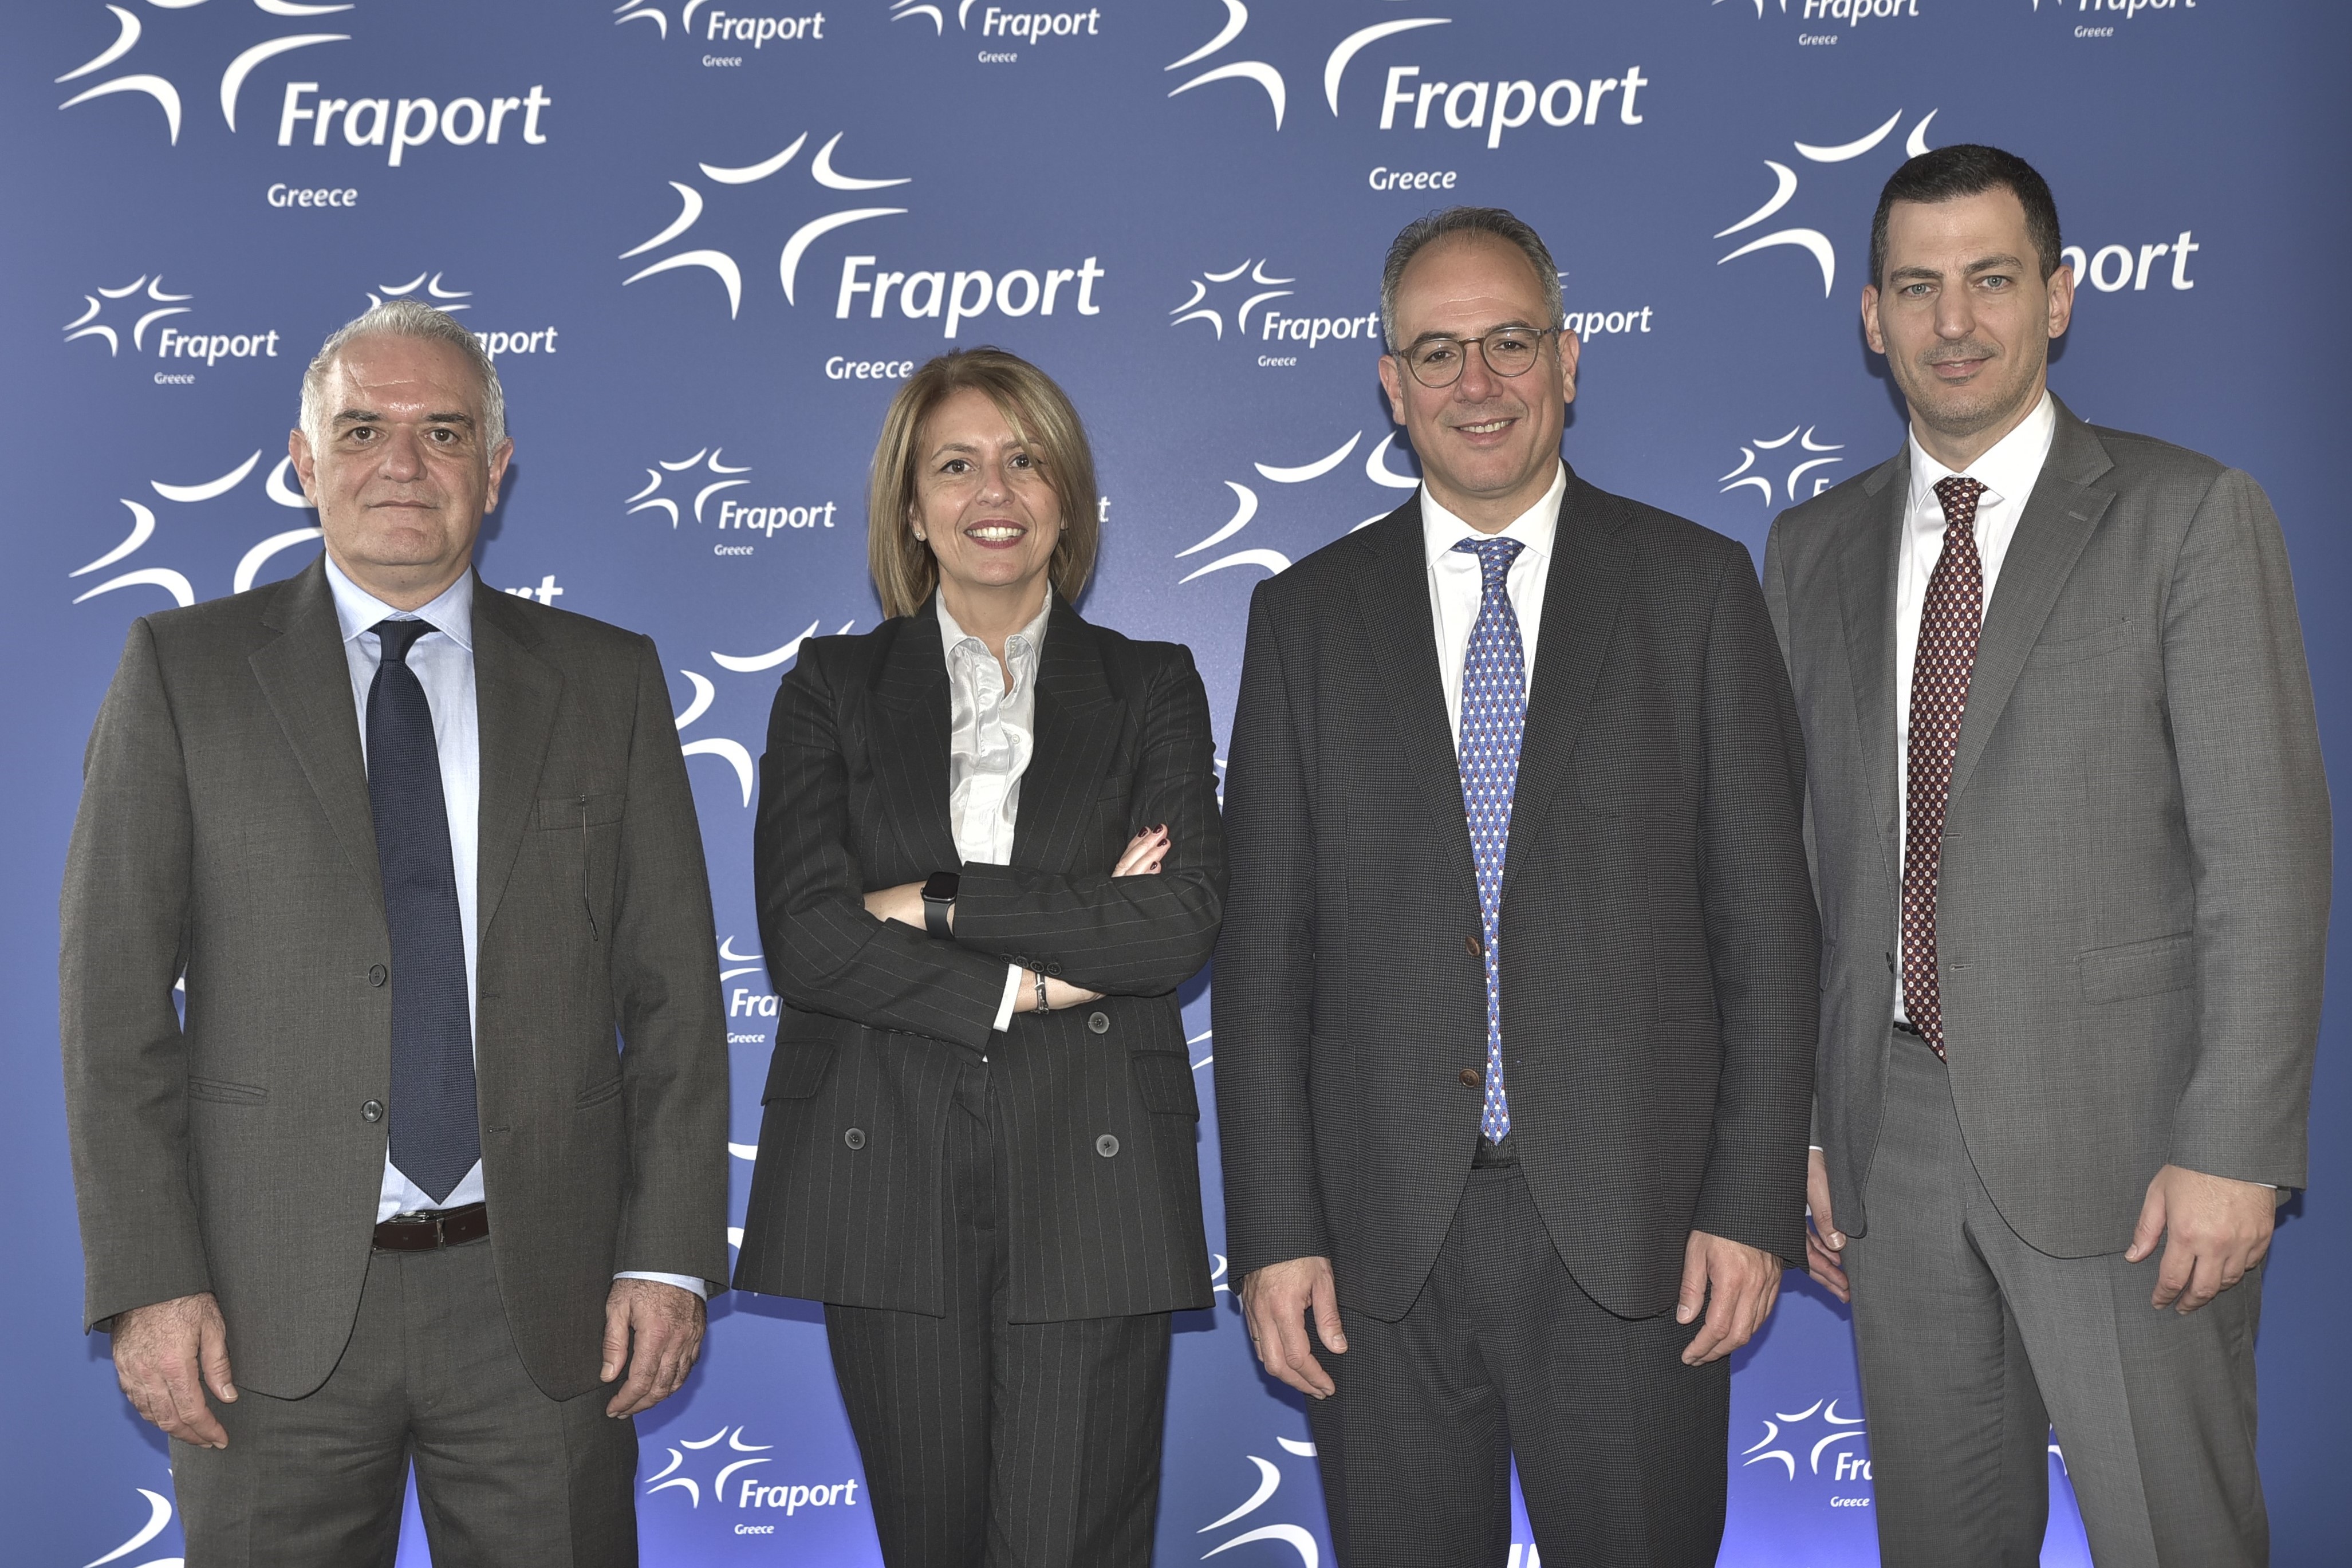 From left to right: Mr. Savvas Karagiannis, Corporate Communications Manager, Fraport Greece, Mrs. Katerina Pollatou, Airline Marketing & Development Manager/ Commercial & Business Development, Mr. George Vilos, Executive Director, Commercial & Business Development, Fraport Greece and Mr. Haris Filos, Air Service Development Manager/ Commercial & Business Development